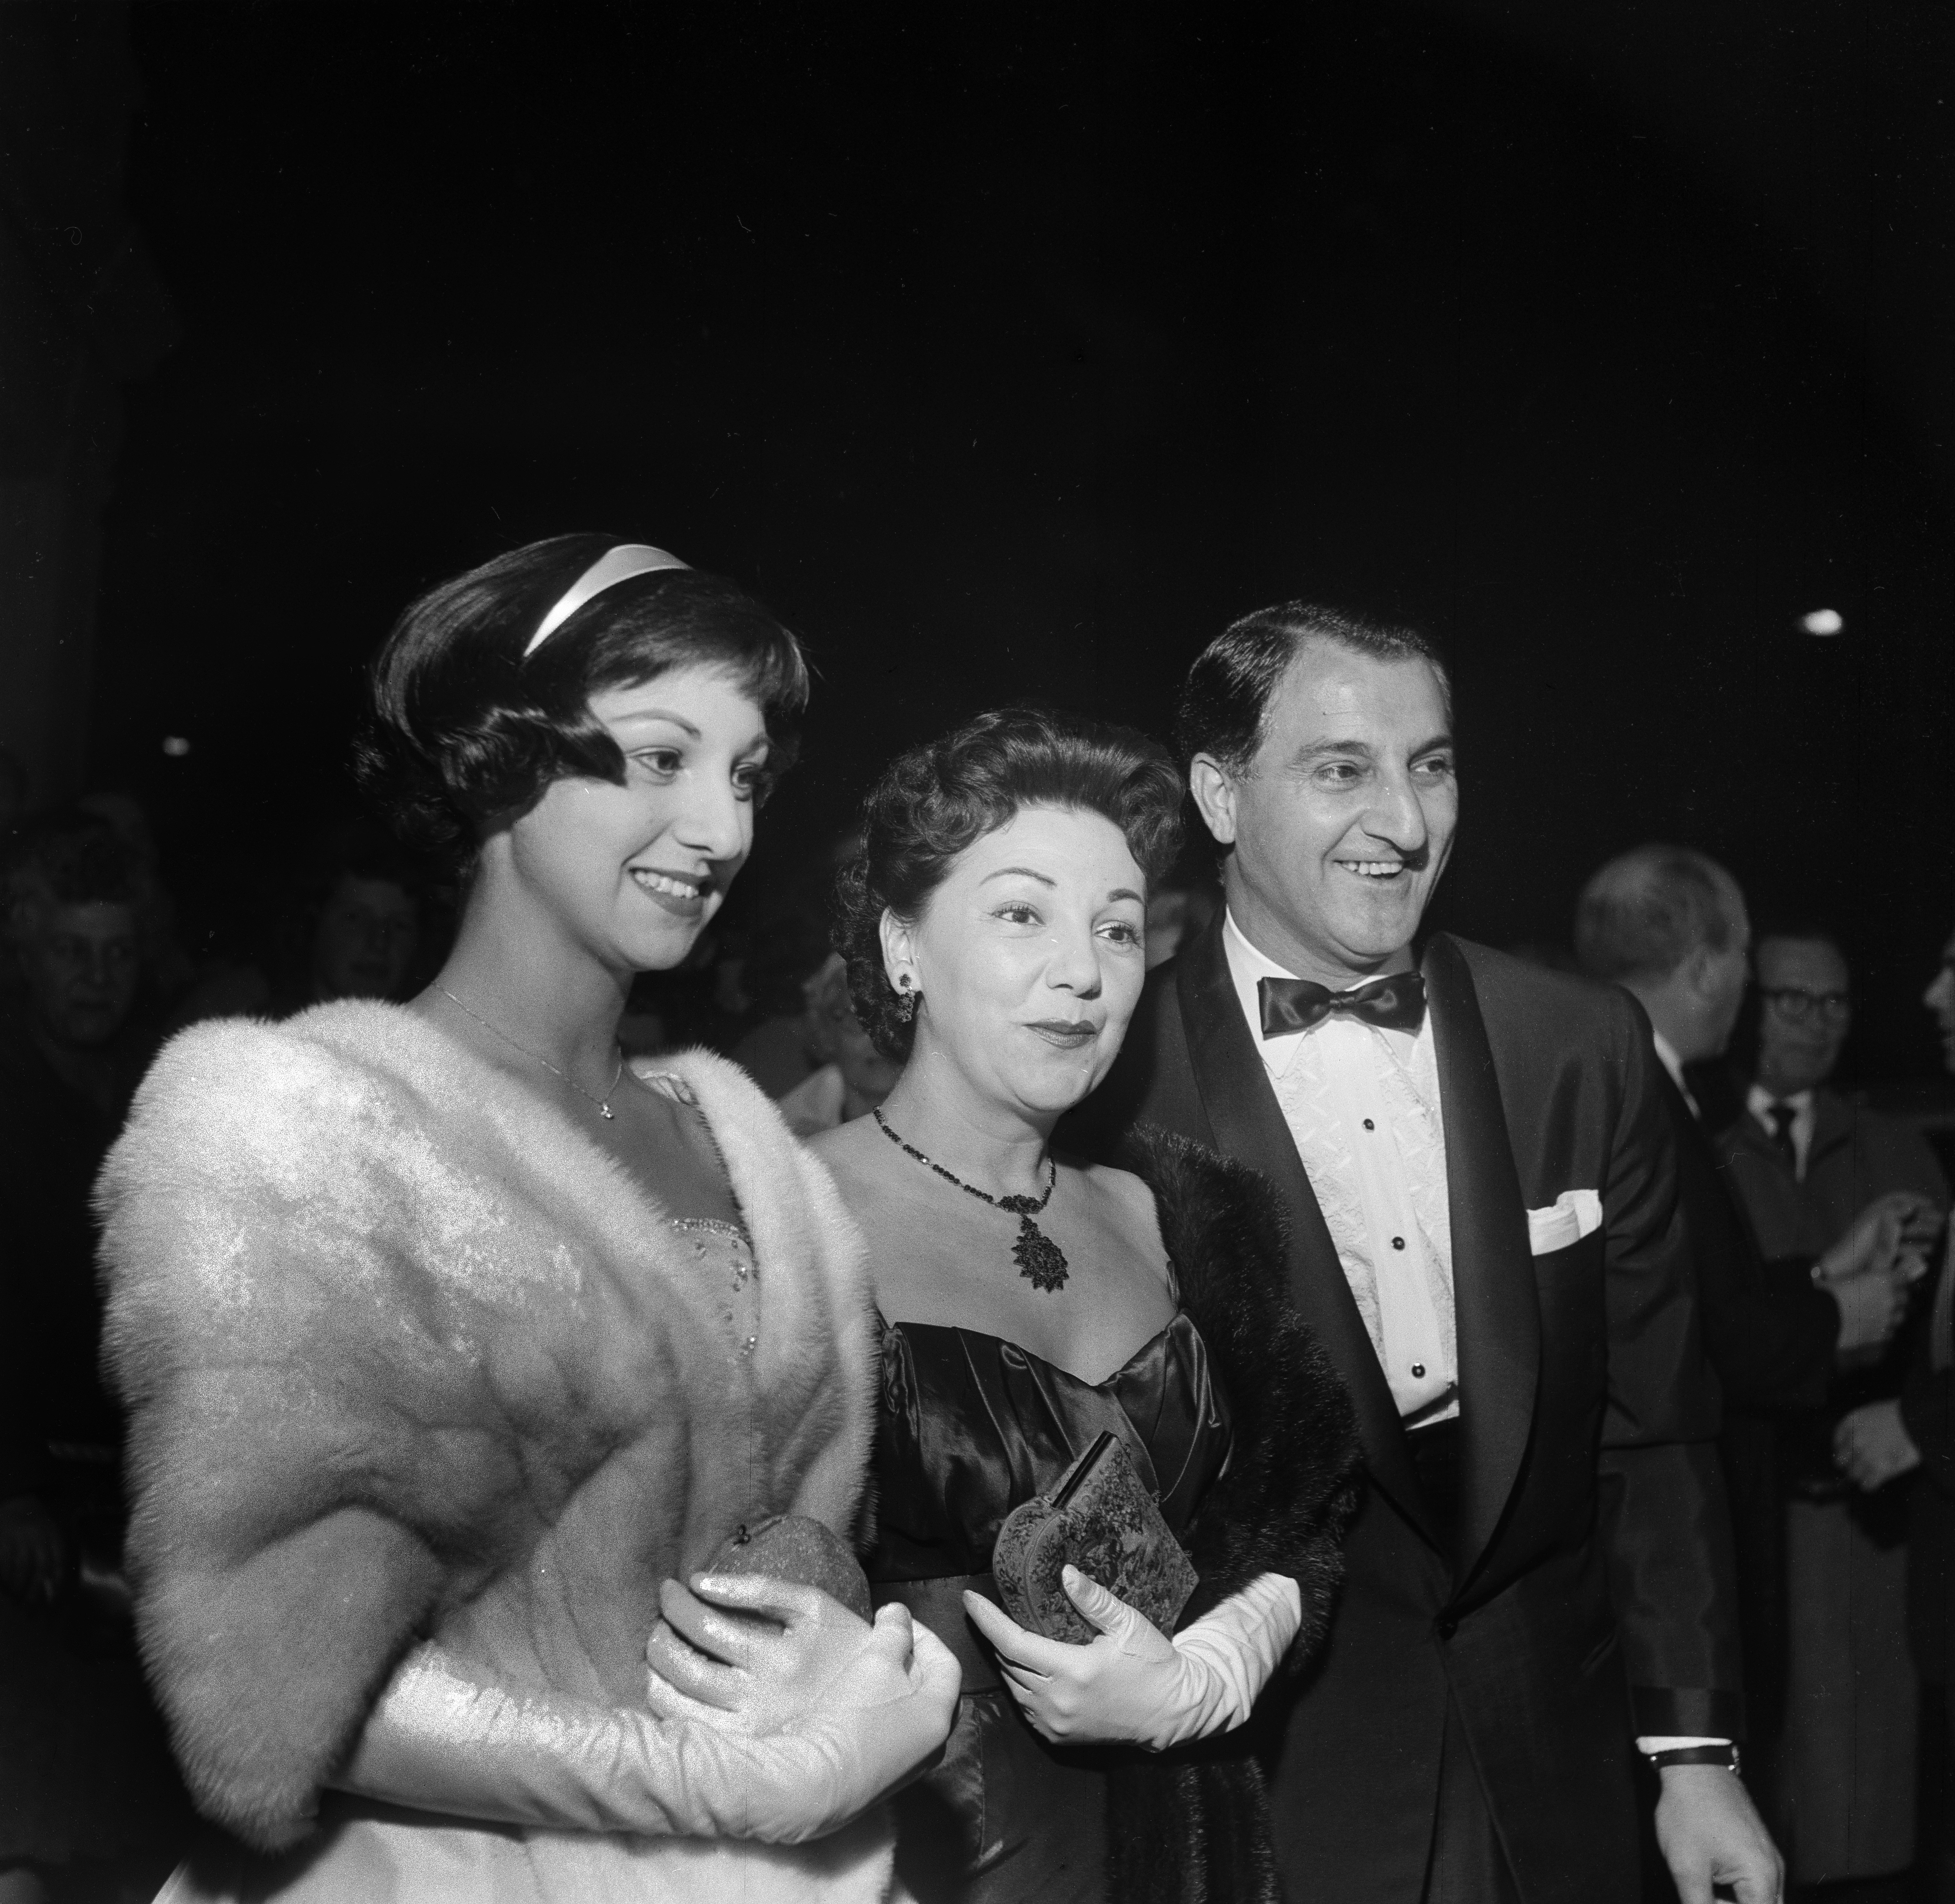 Danny Thomas, Rose Marie, and Marlo Thomas at an LA, California event circa 1958. | Source: Getty Images